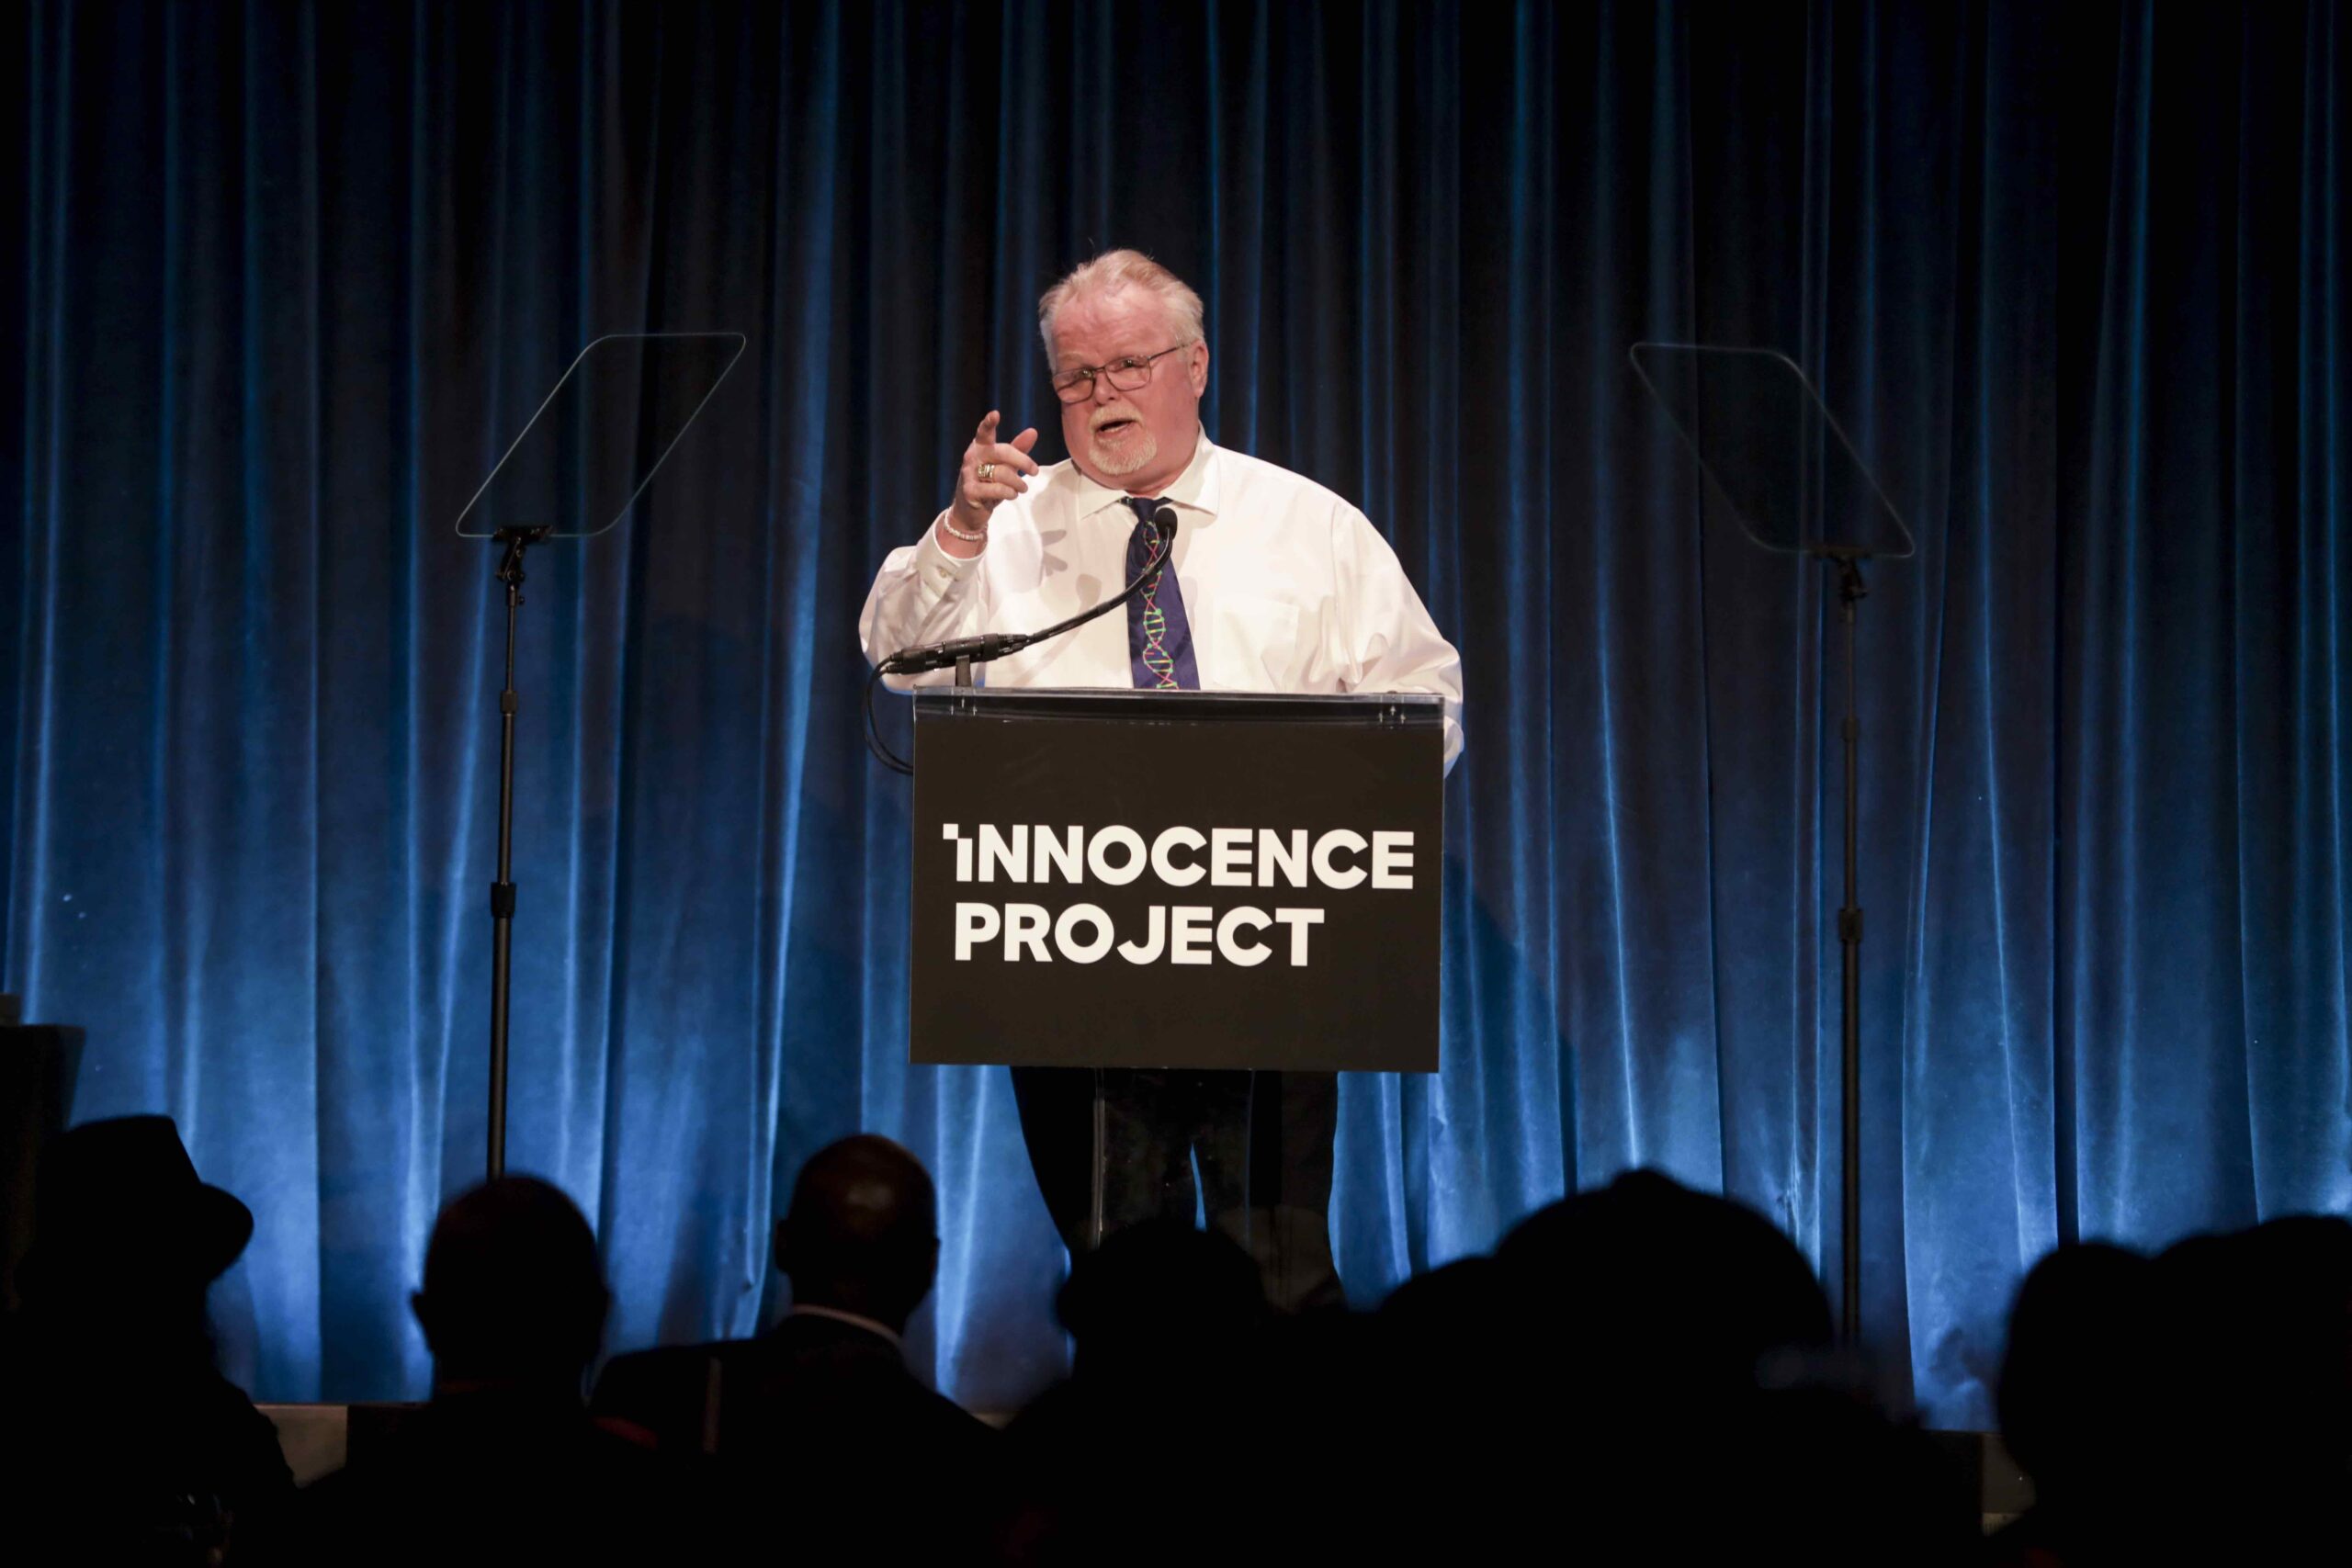 Kirk Bloodsworth honored with the Champion of Justice Award (Image: Matthew Adam/Innocence Project)